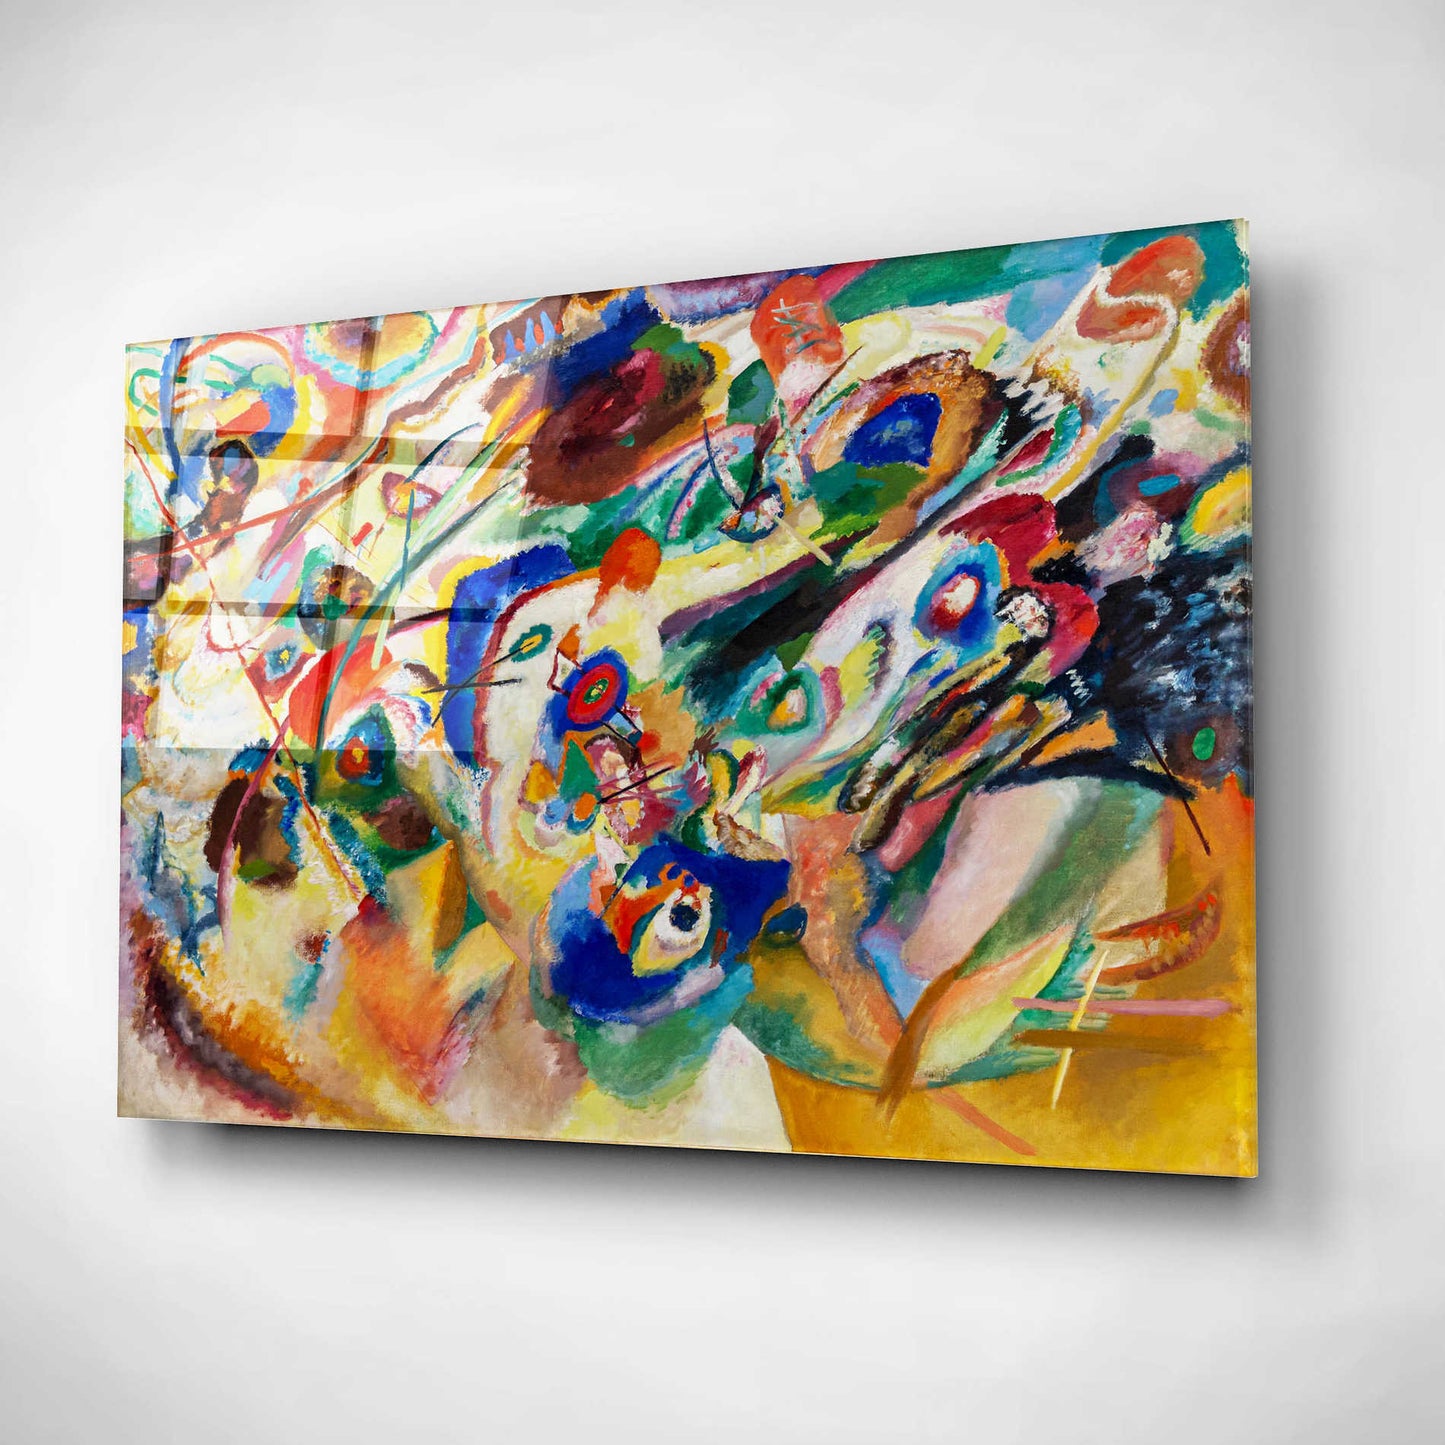 Epic Art 'Sketch 2 for Composition VII' by Wassily Kandinsky, Acrylic Glass Wall Art,24x16